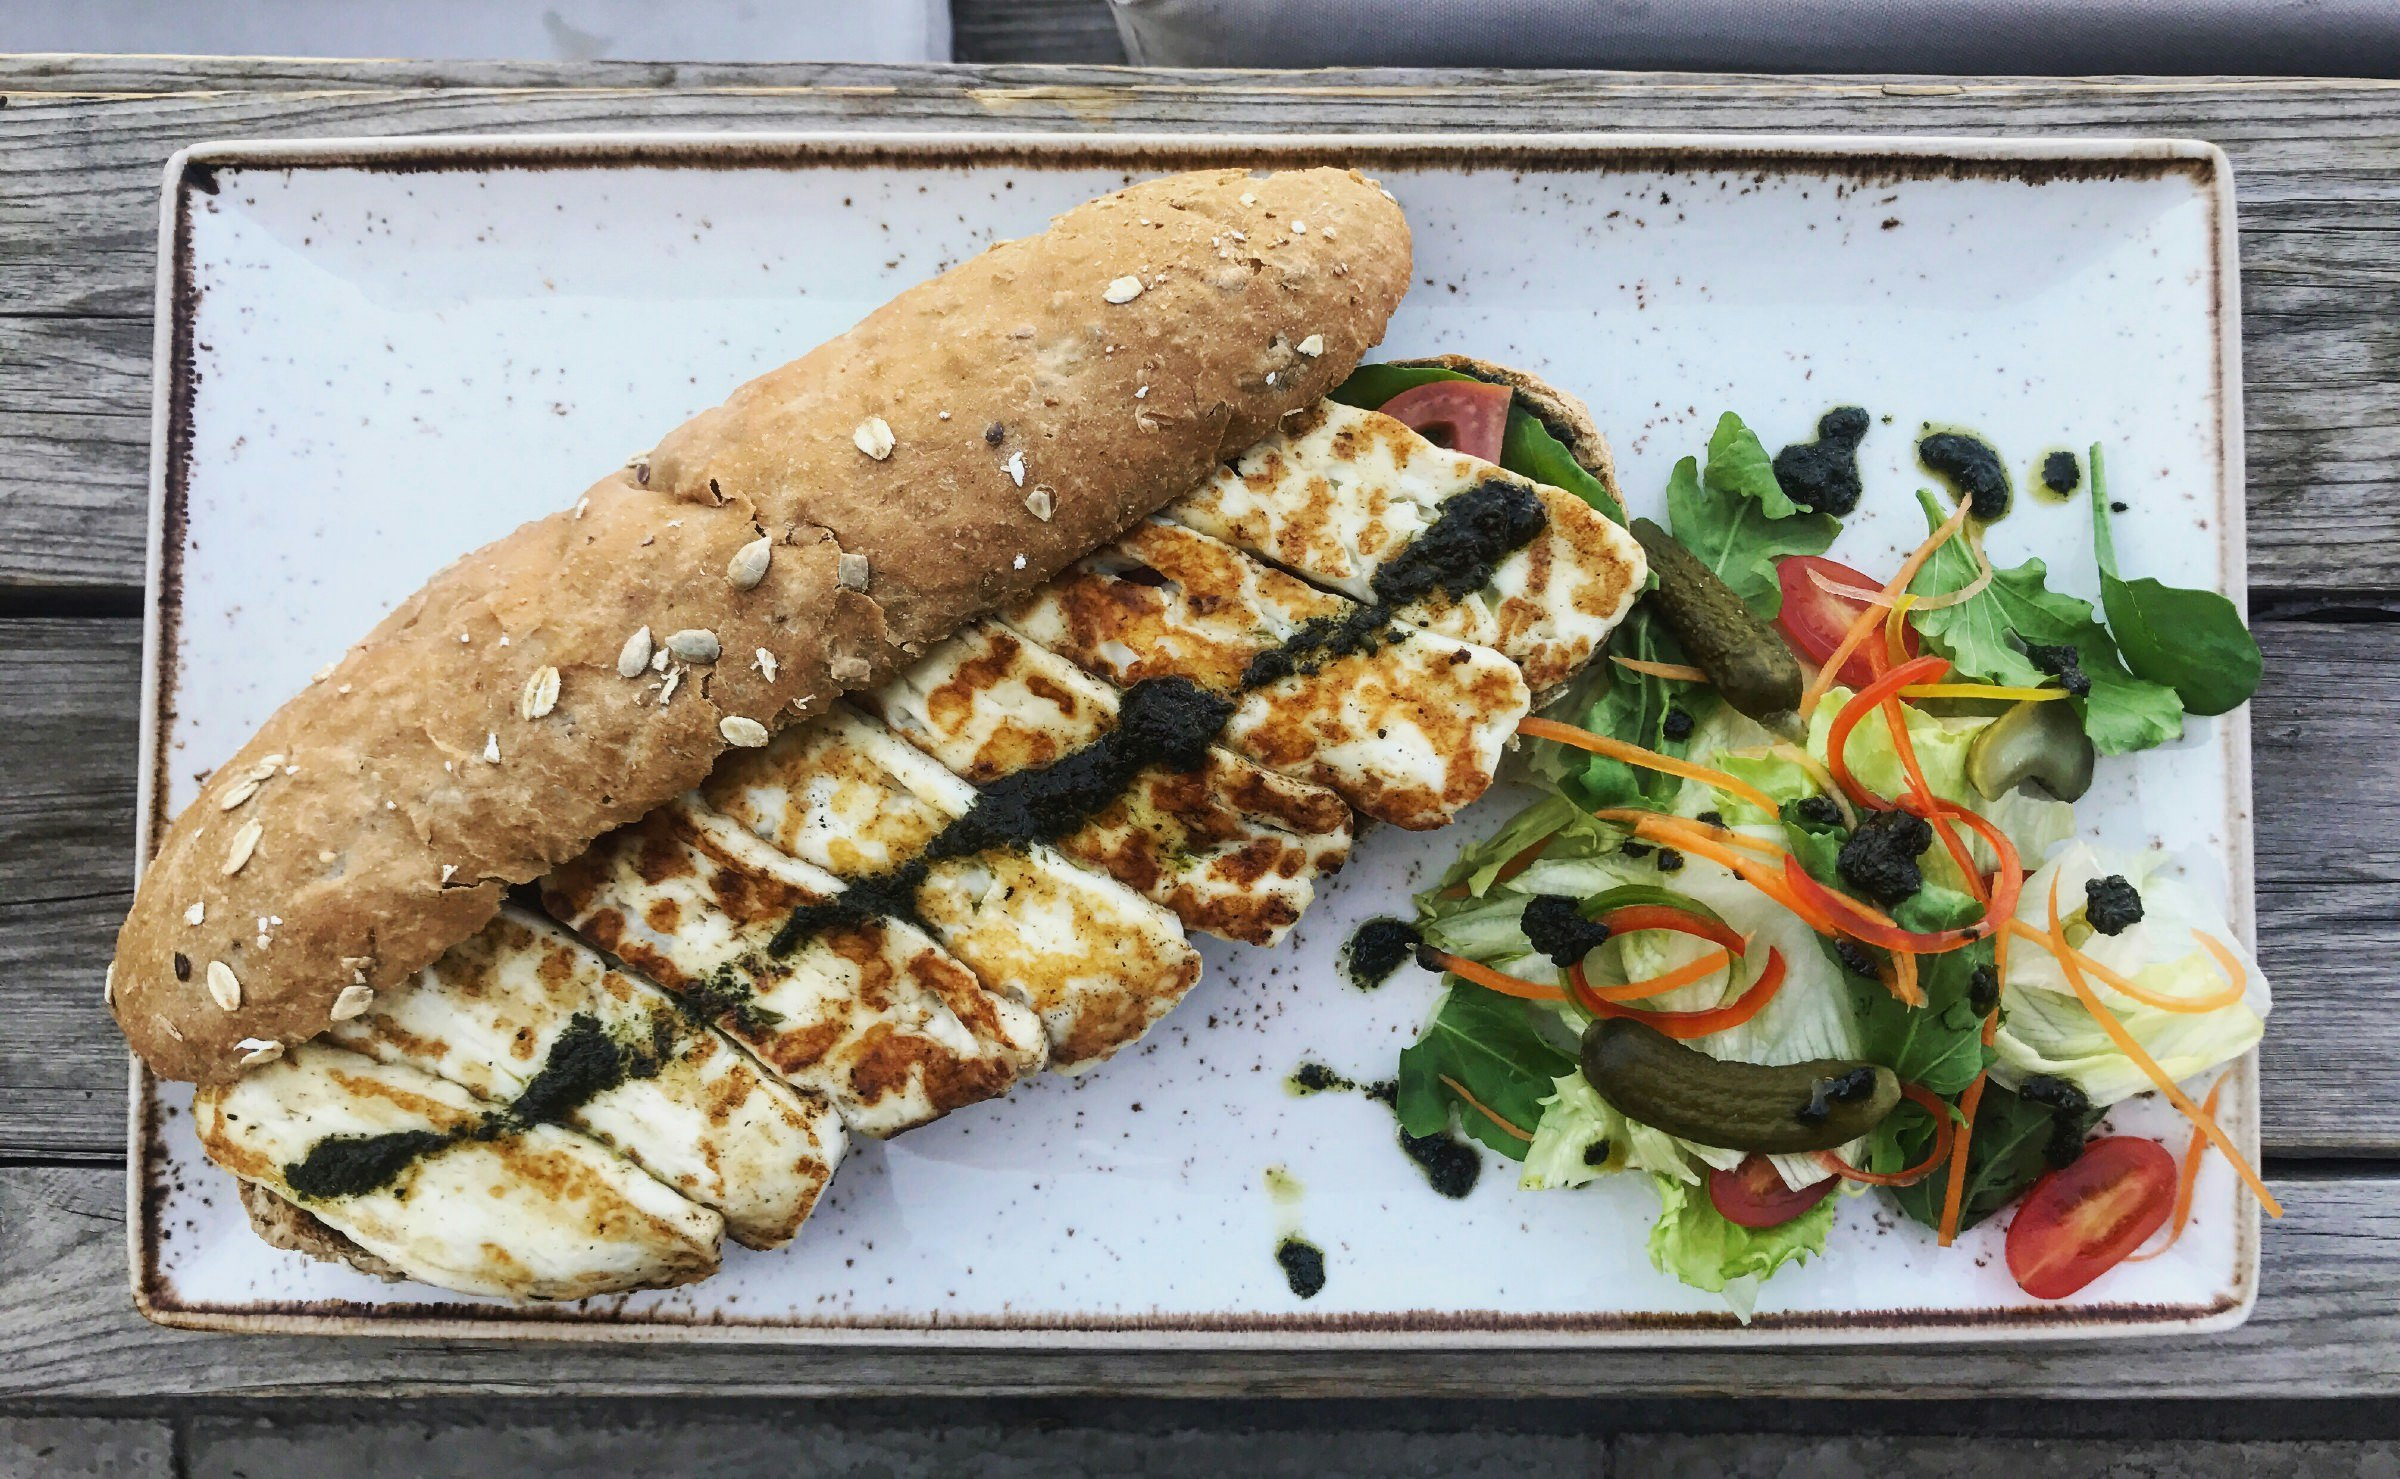 The halloumi sandwich - a blend of local and international flavors